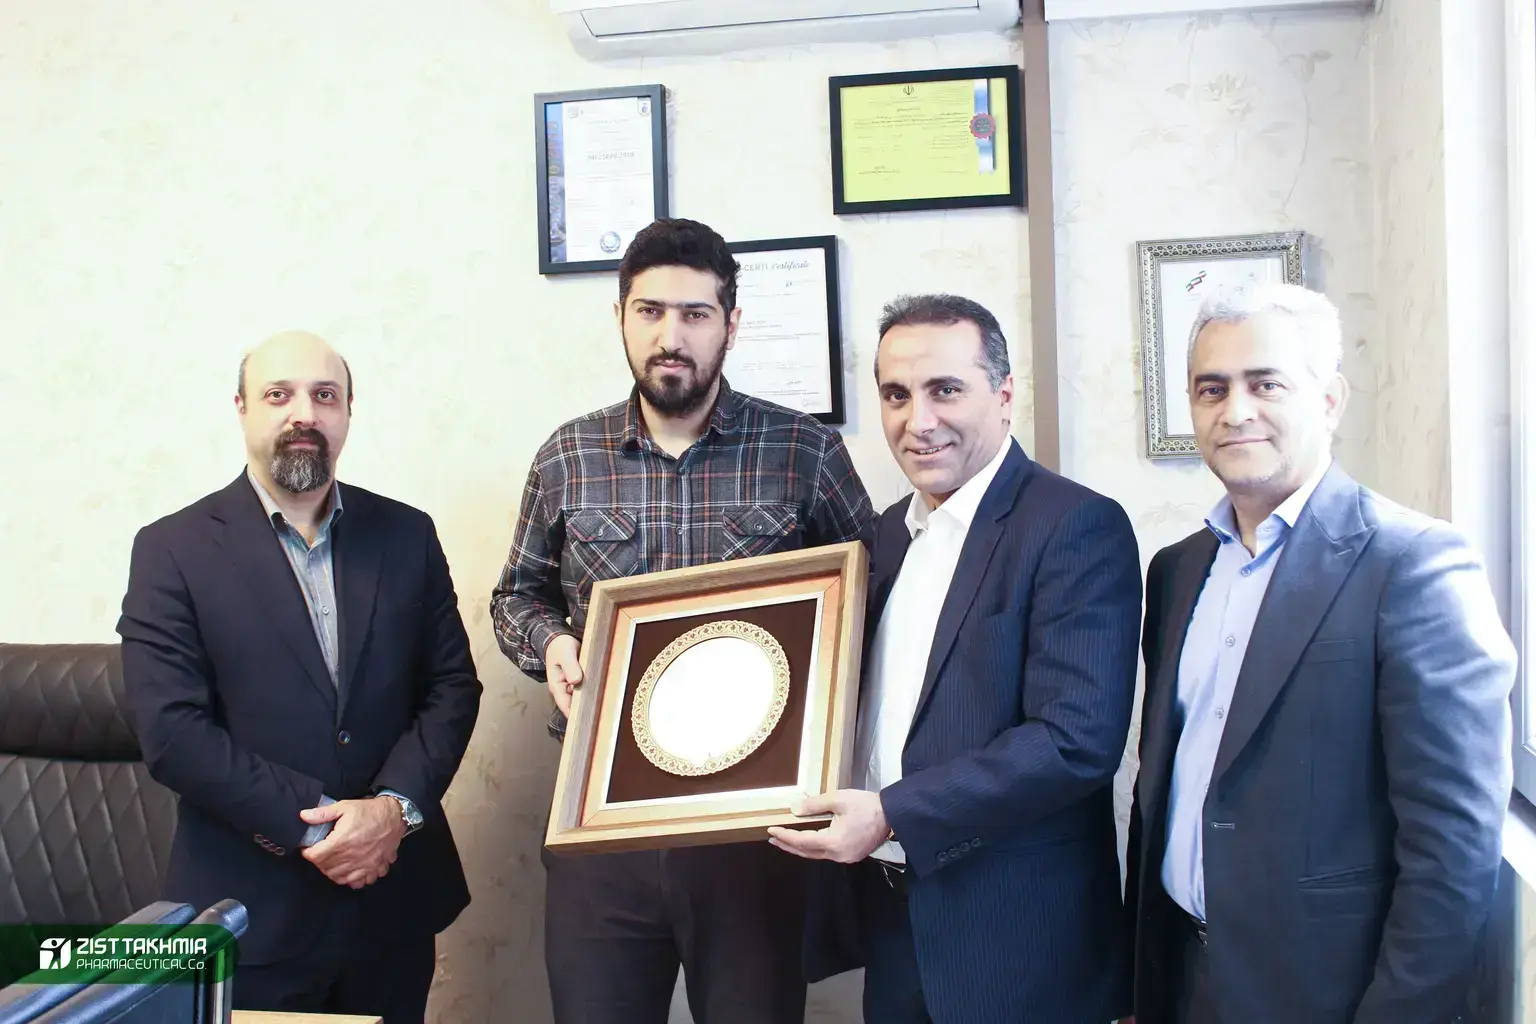 Annual acknowledgment of cooperation from Zist Takhmir Company to Bank Melli Iran